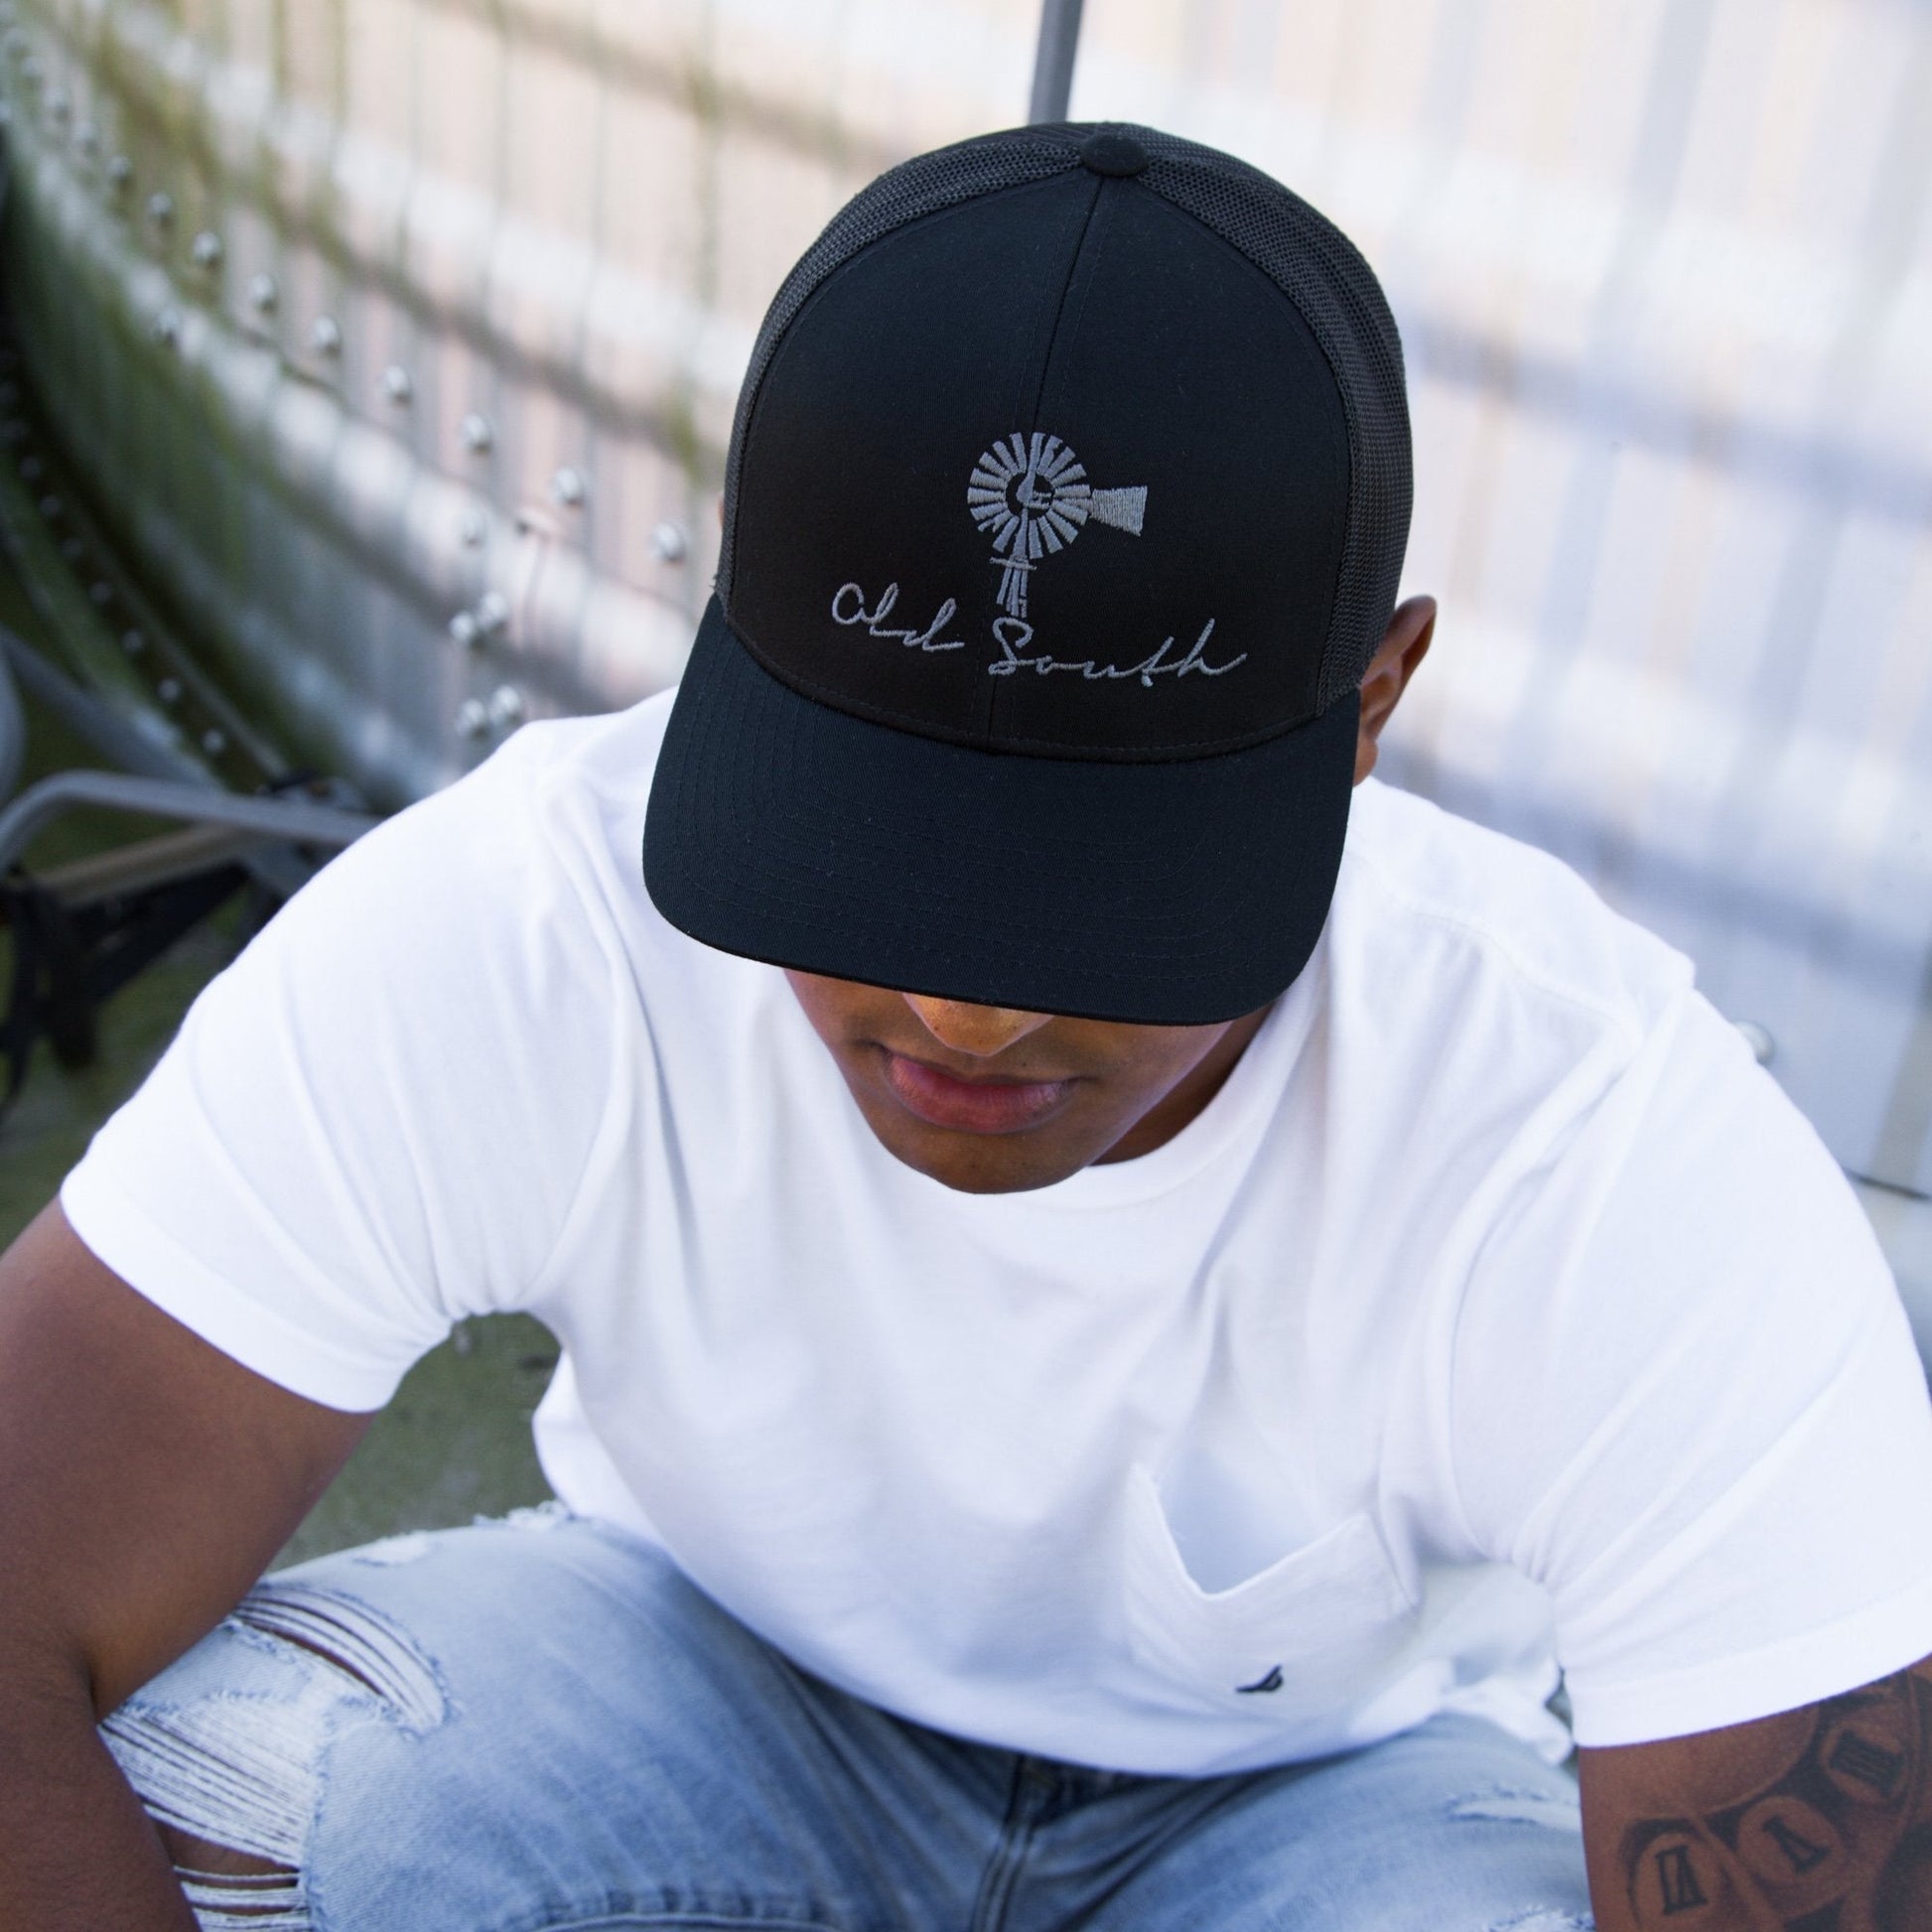 https://www.oldsouthapparel.com/cdn/shop/products/oldsouthapparel-classic-trucker-hat-993183.jpg?v=1700112595&width=1946